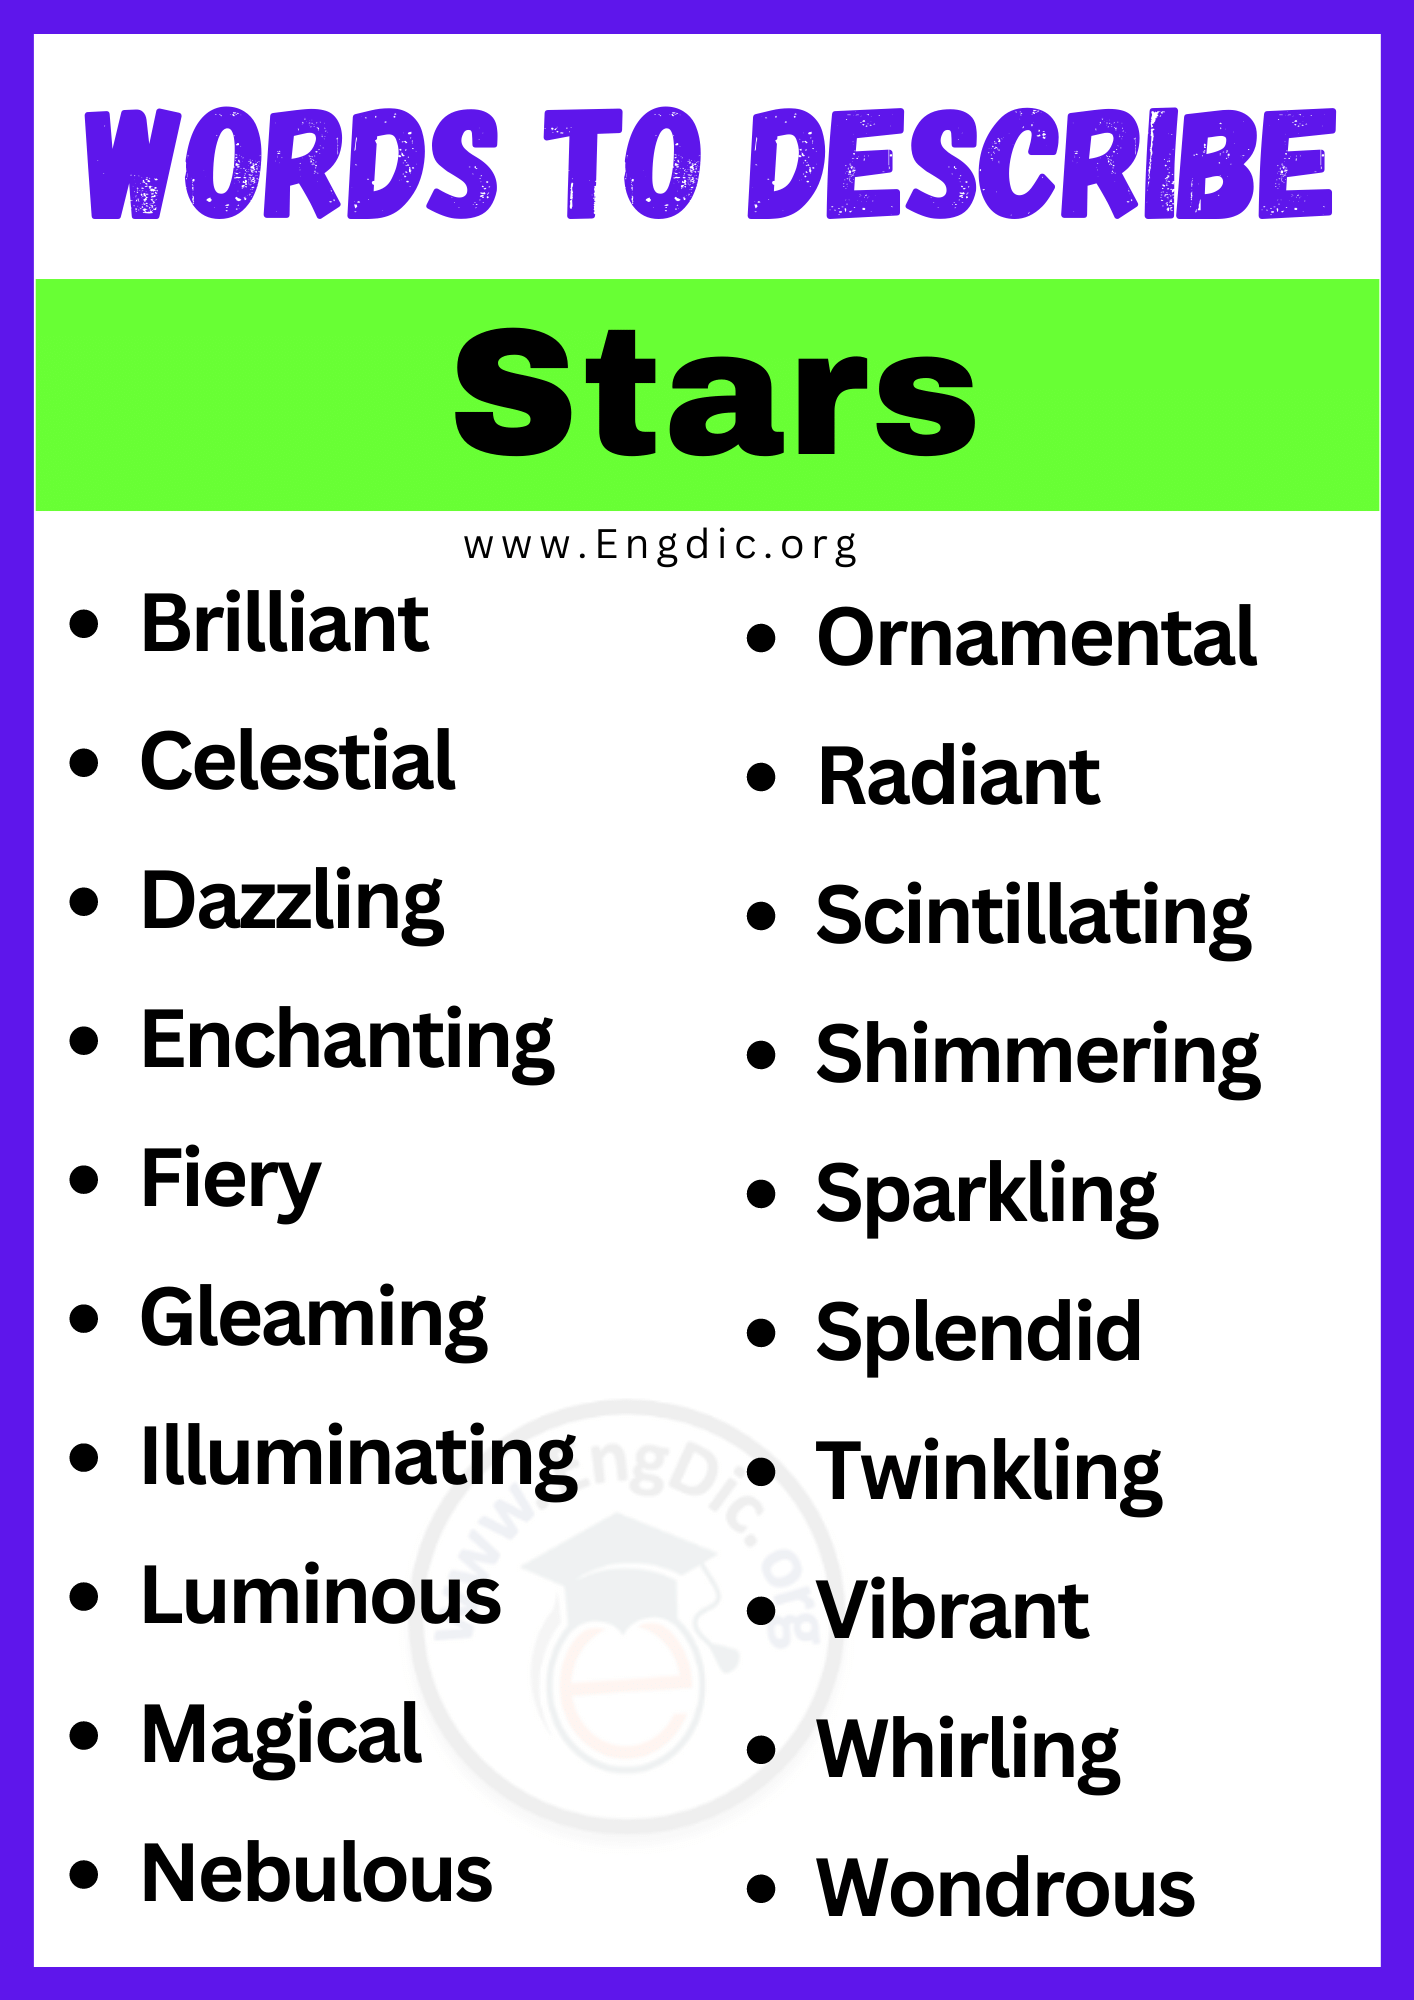 Words to Describe Stars